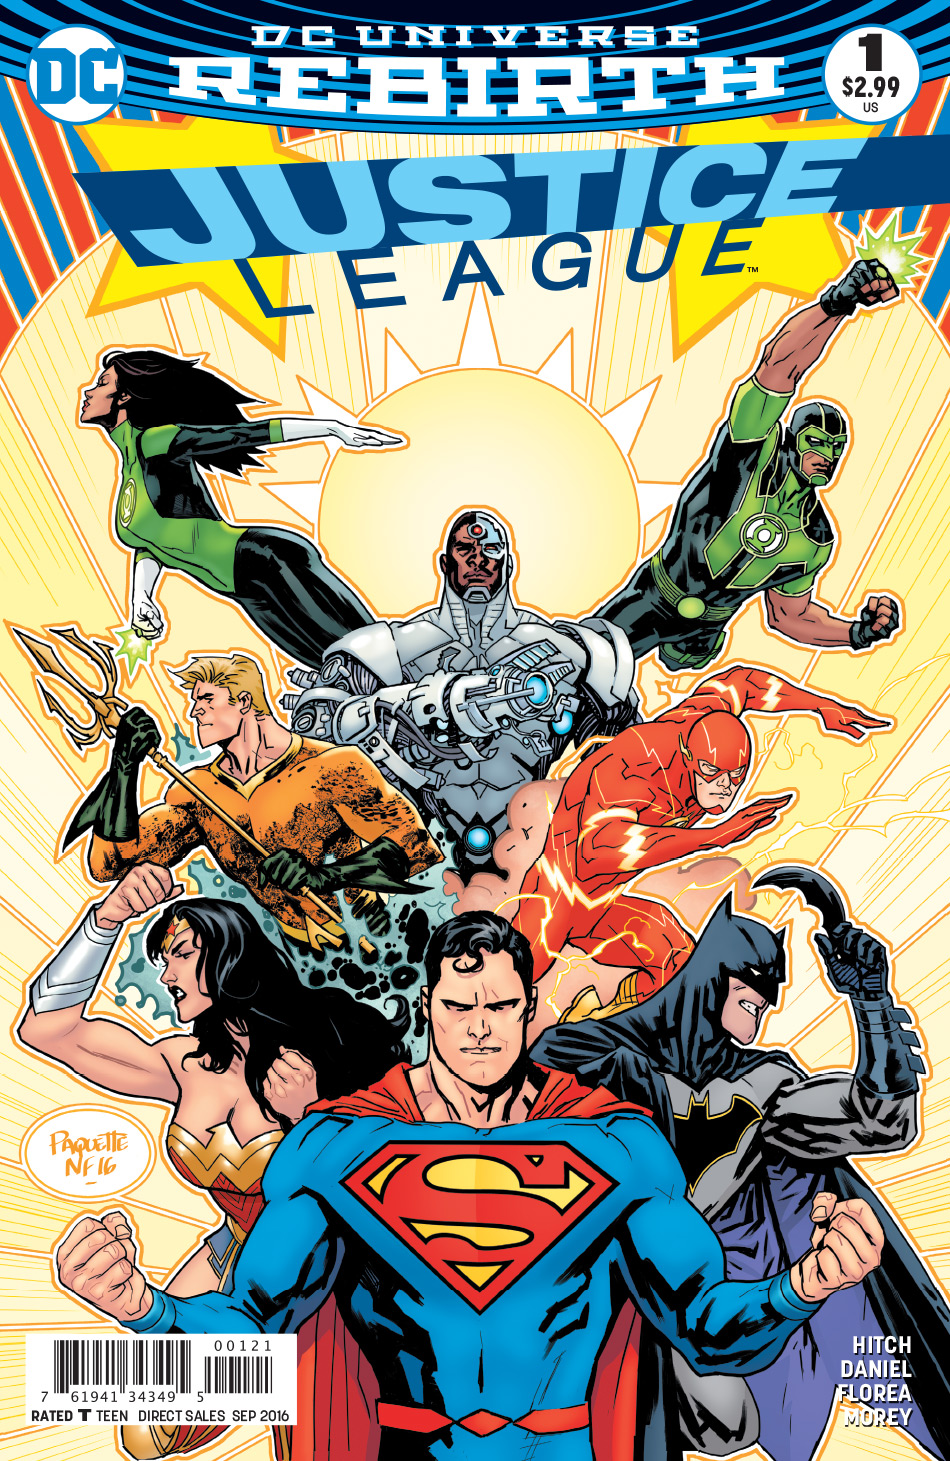 JUSTICE LEAGUE Cv1 variant by Yanick Paquette and Nathan Fairbairn